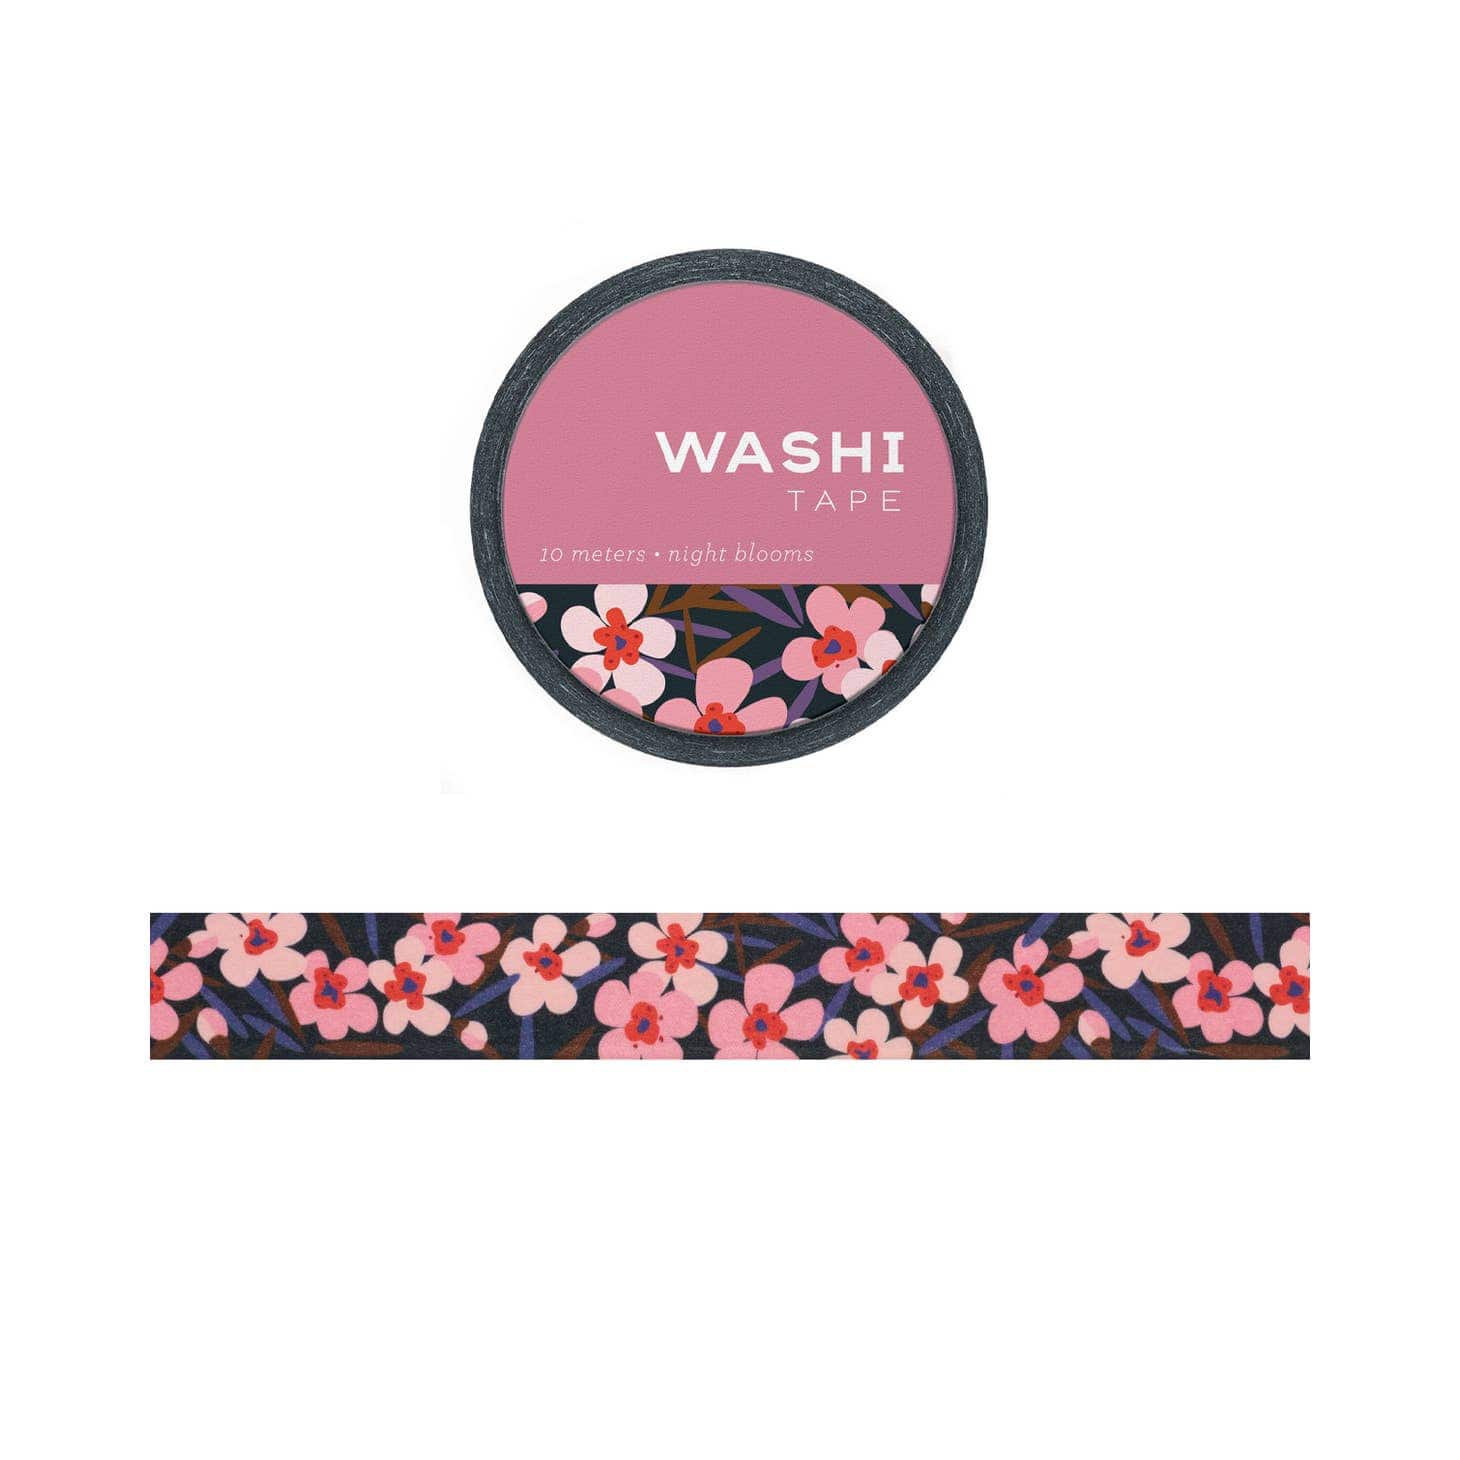 Girl of All Work Cherry Blossoms & Night Blooms Washi Tapes Night Blooms Kawaii Gifts